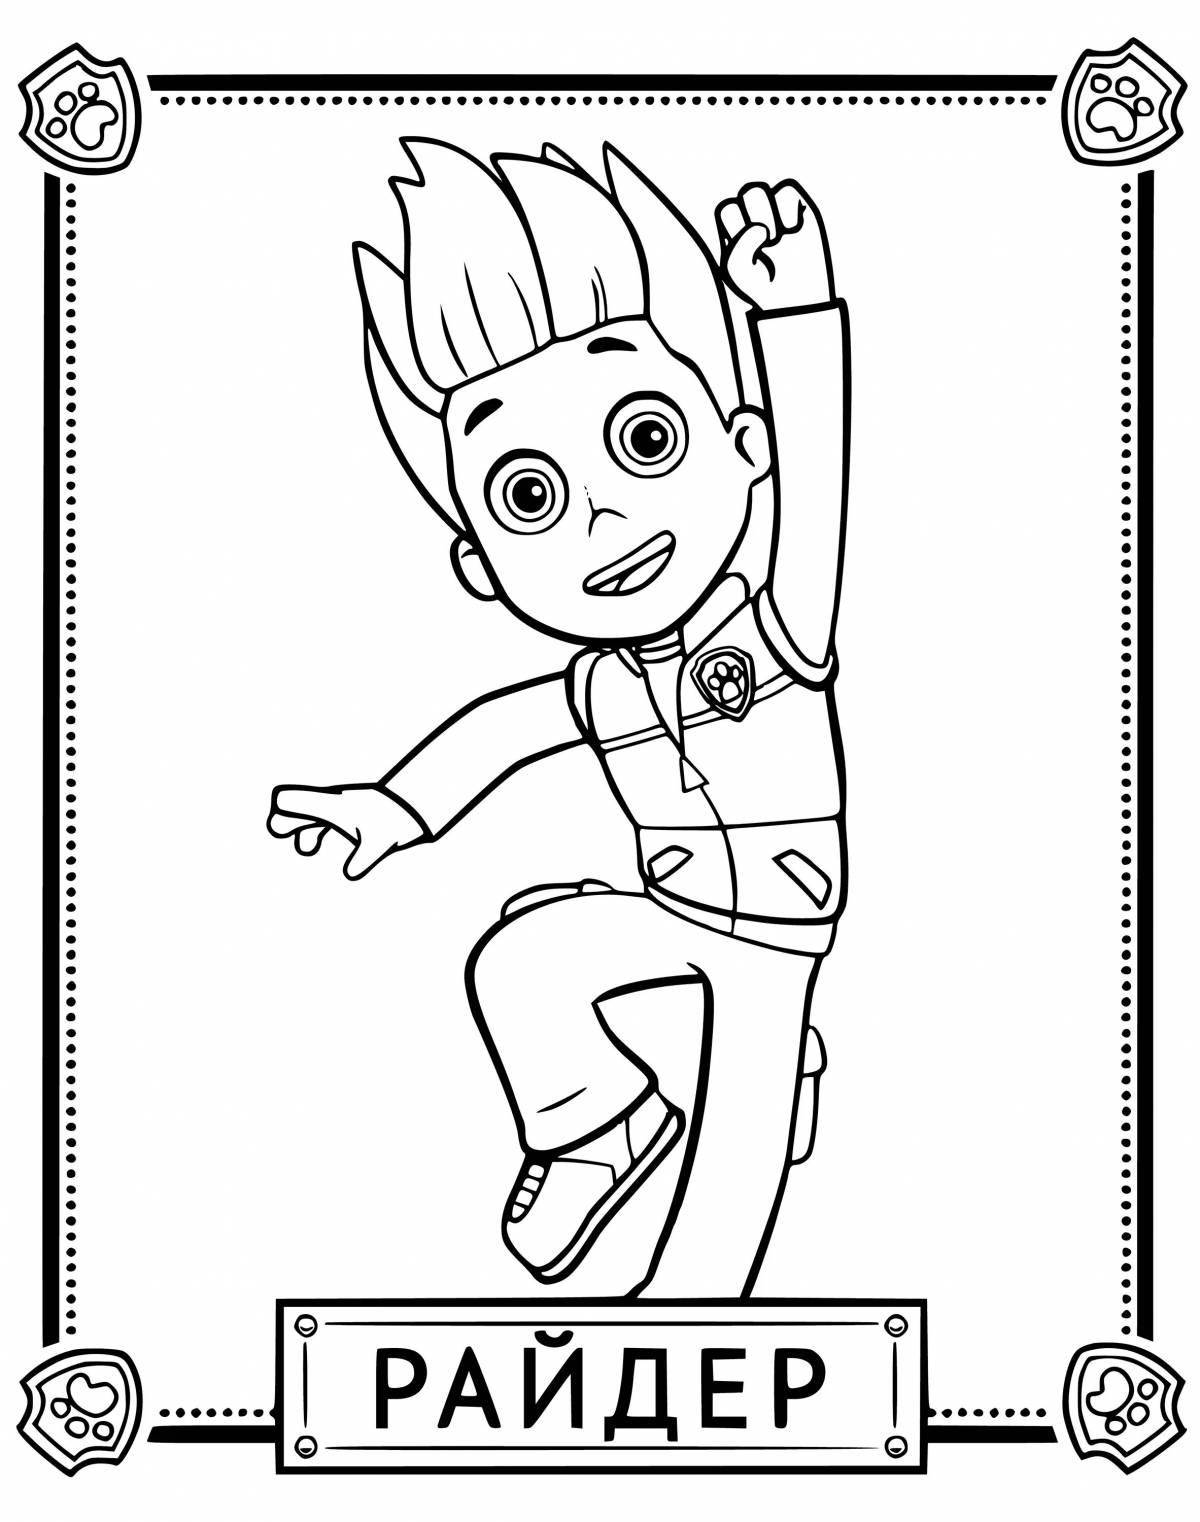 Coloring page exciting rider